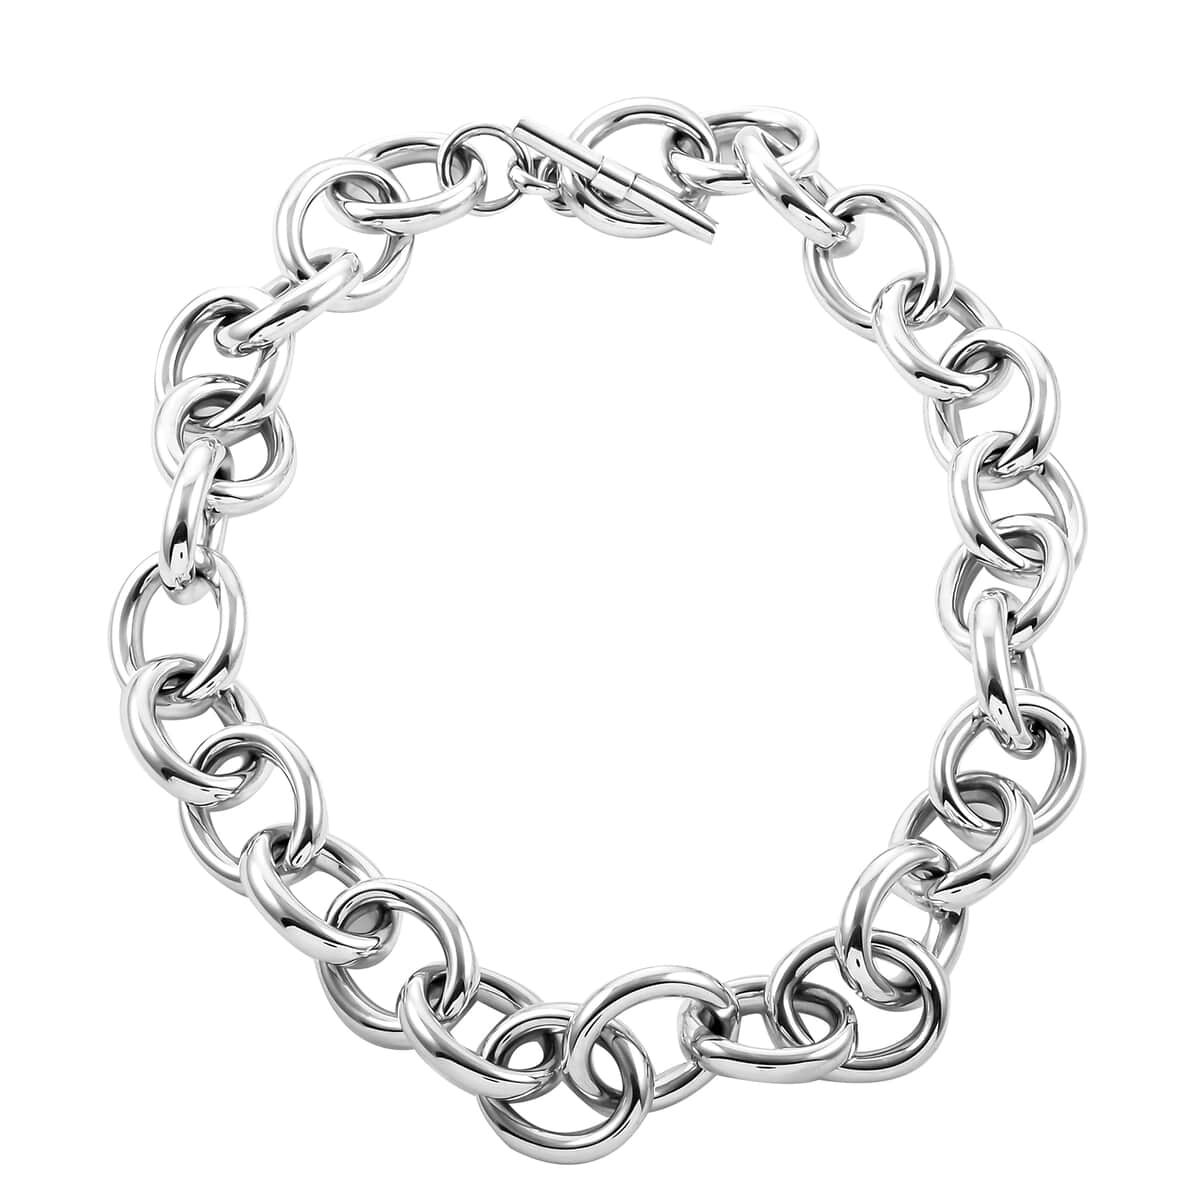 Majul & Co. One Of A Kind Sterling Silver Tubular Link Necklace 24 Inches Hand-Made in Mexico 113 Grams image number 2